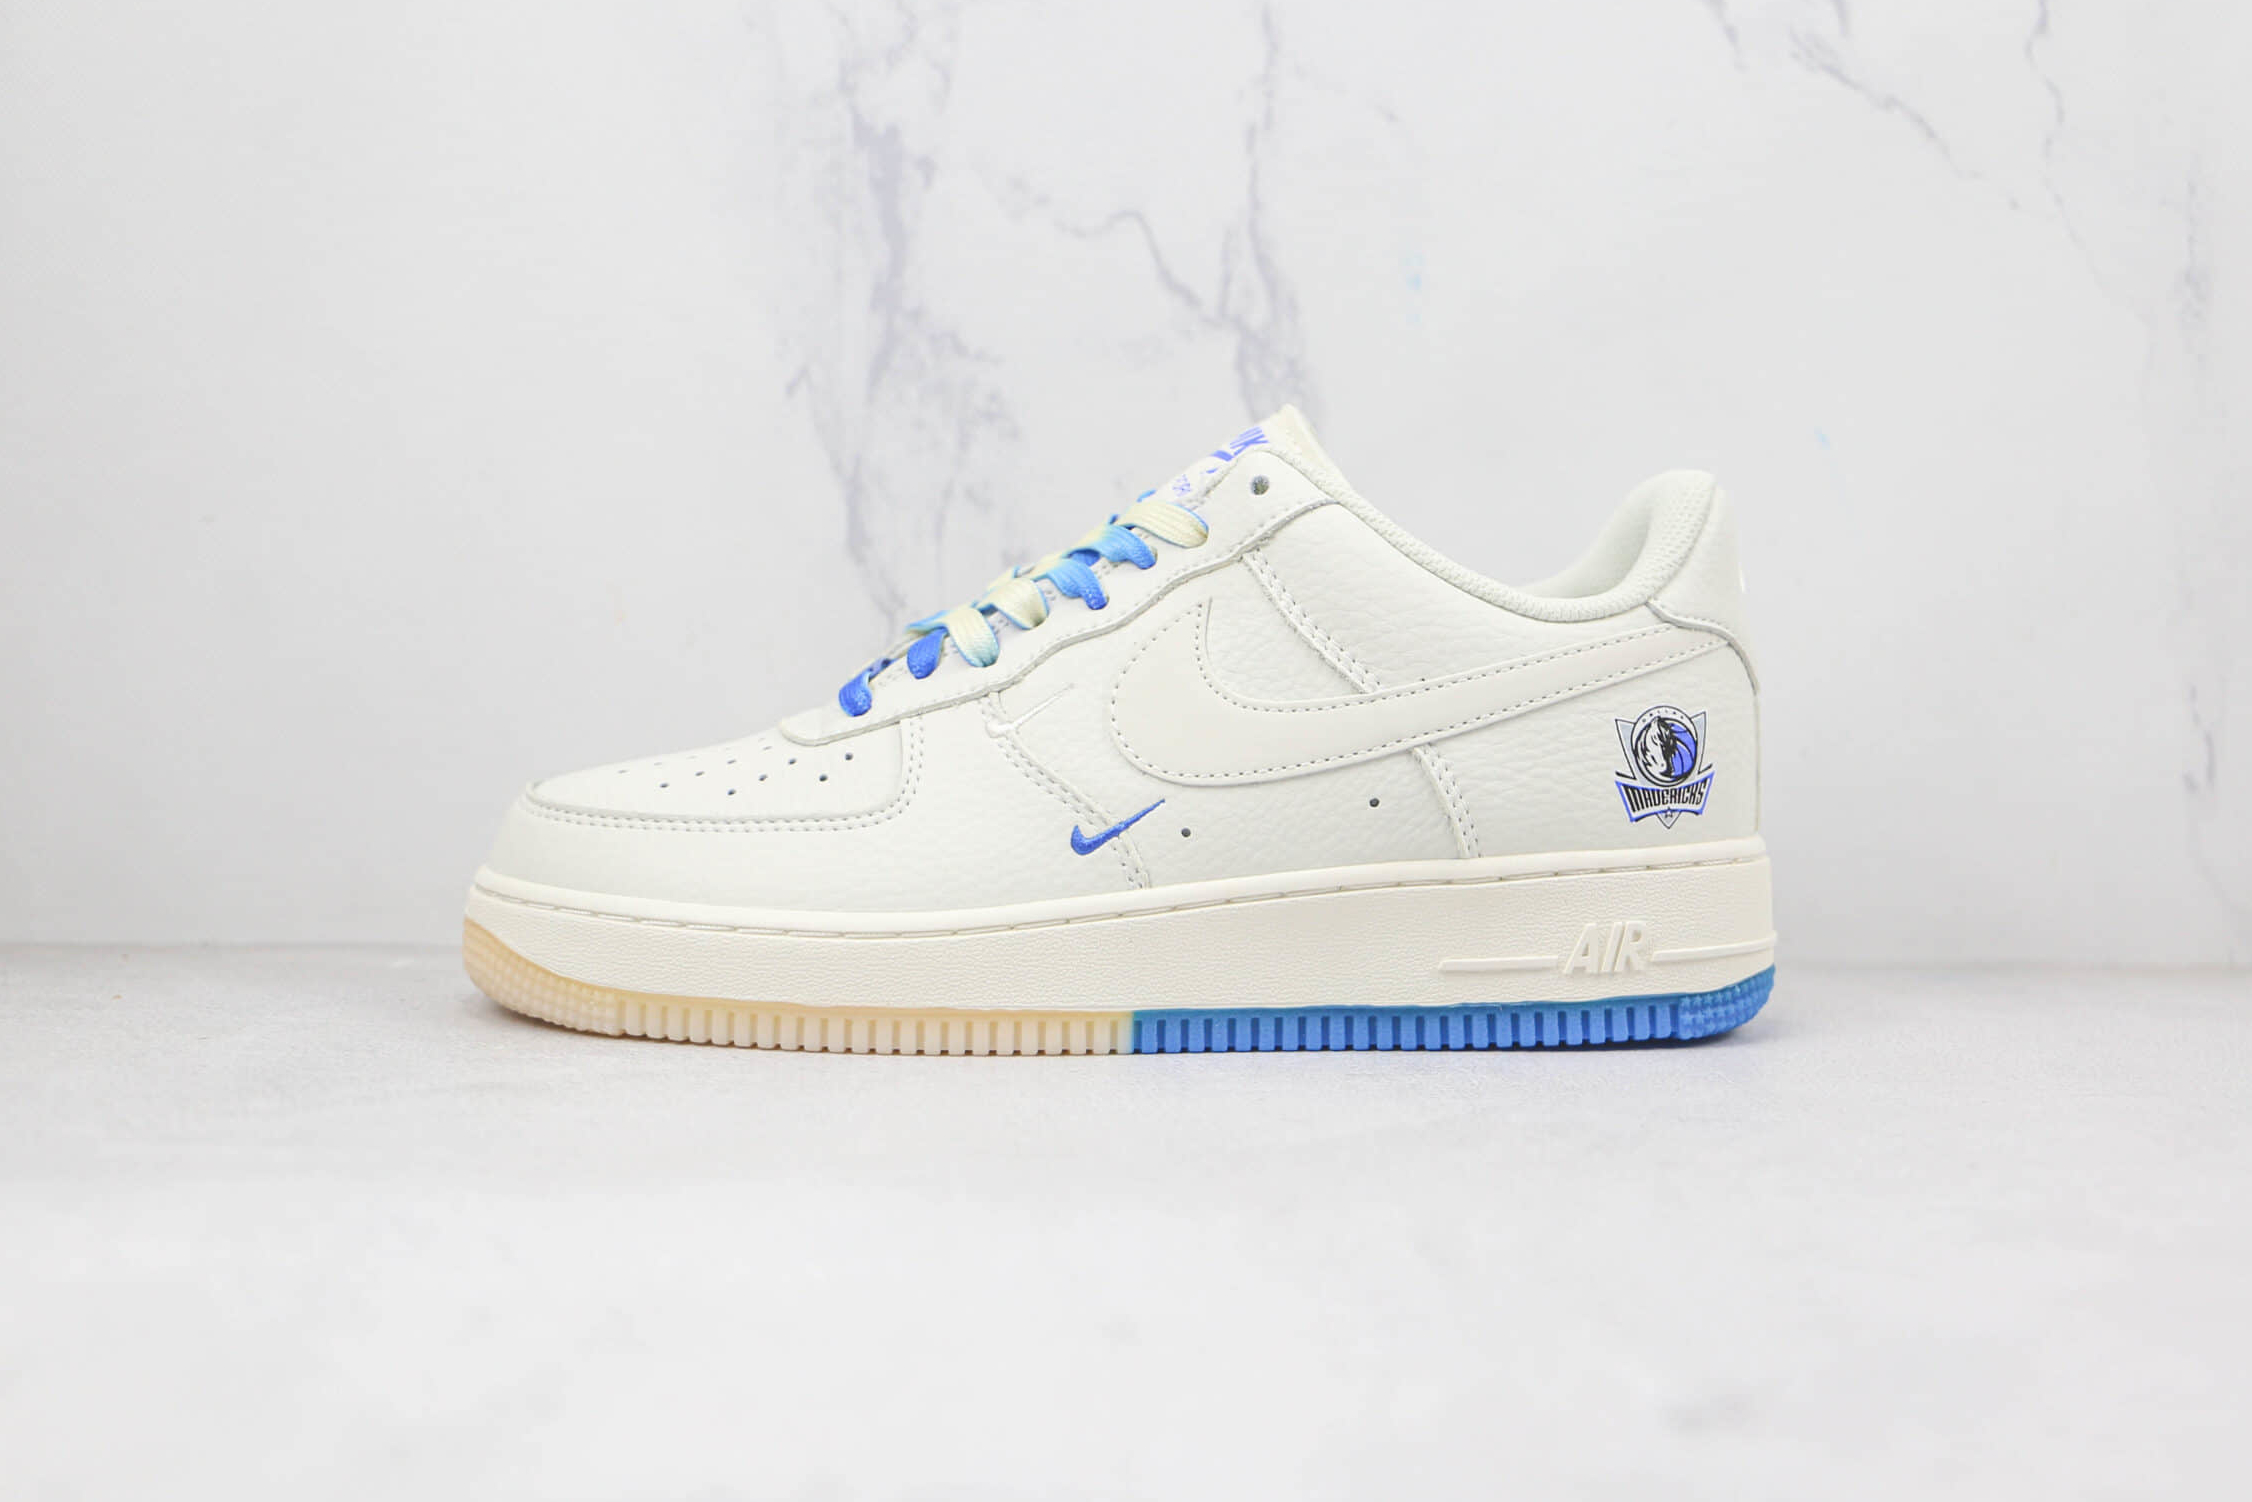 Nike Air Force 1 07 Low White Blue Running Shoes DH2088-606 - Stylish and Comfortable Footwear